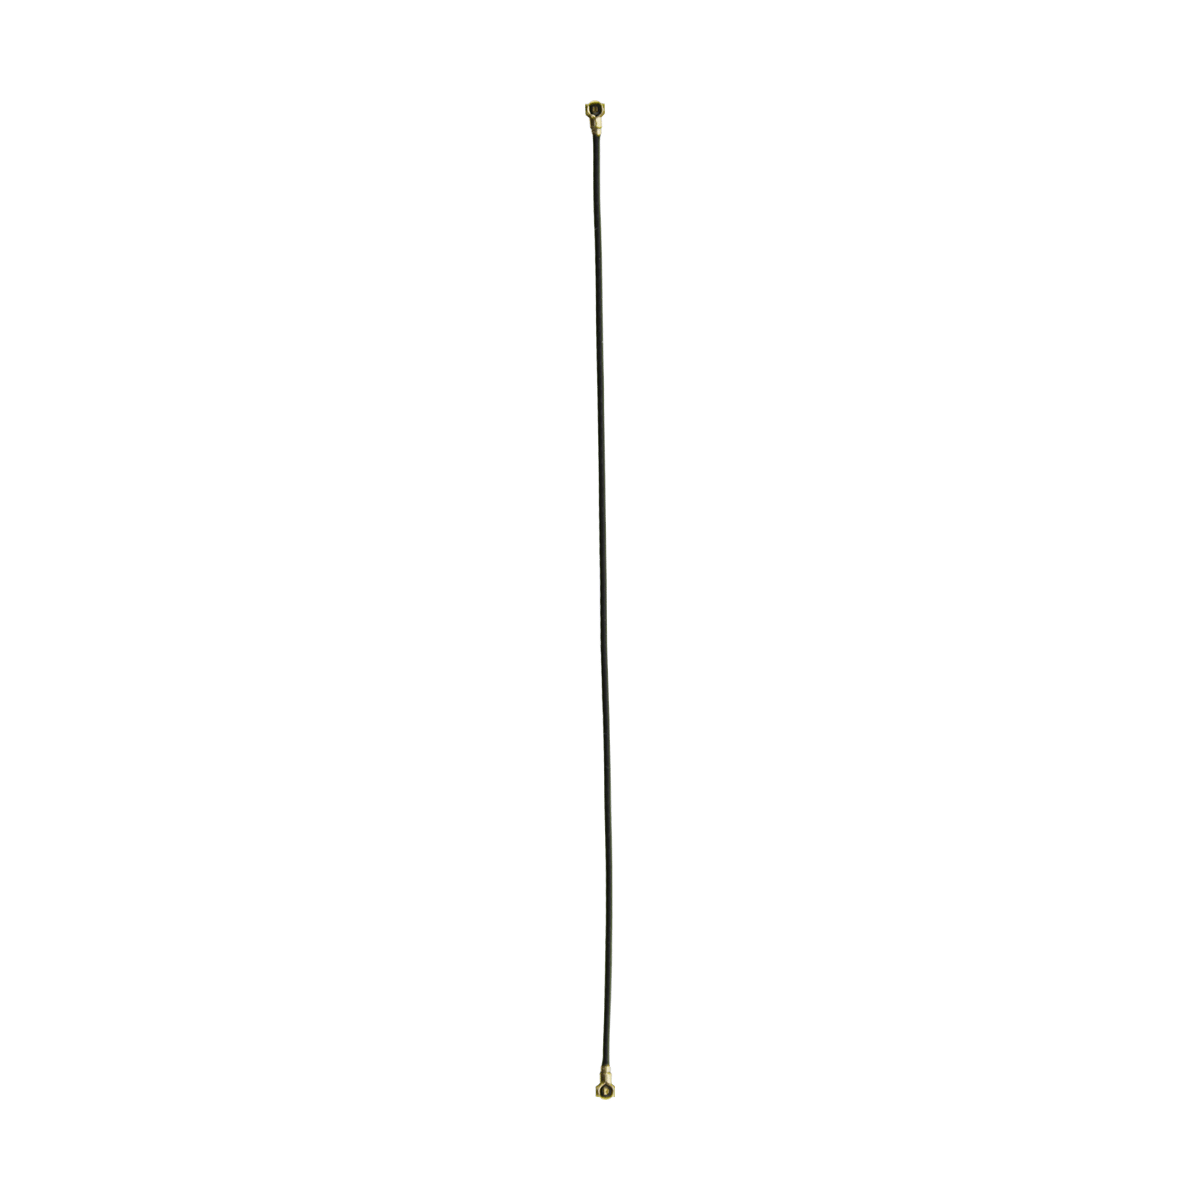 OnePlus 3 WiFi Antenna Cable Replacement